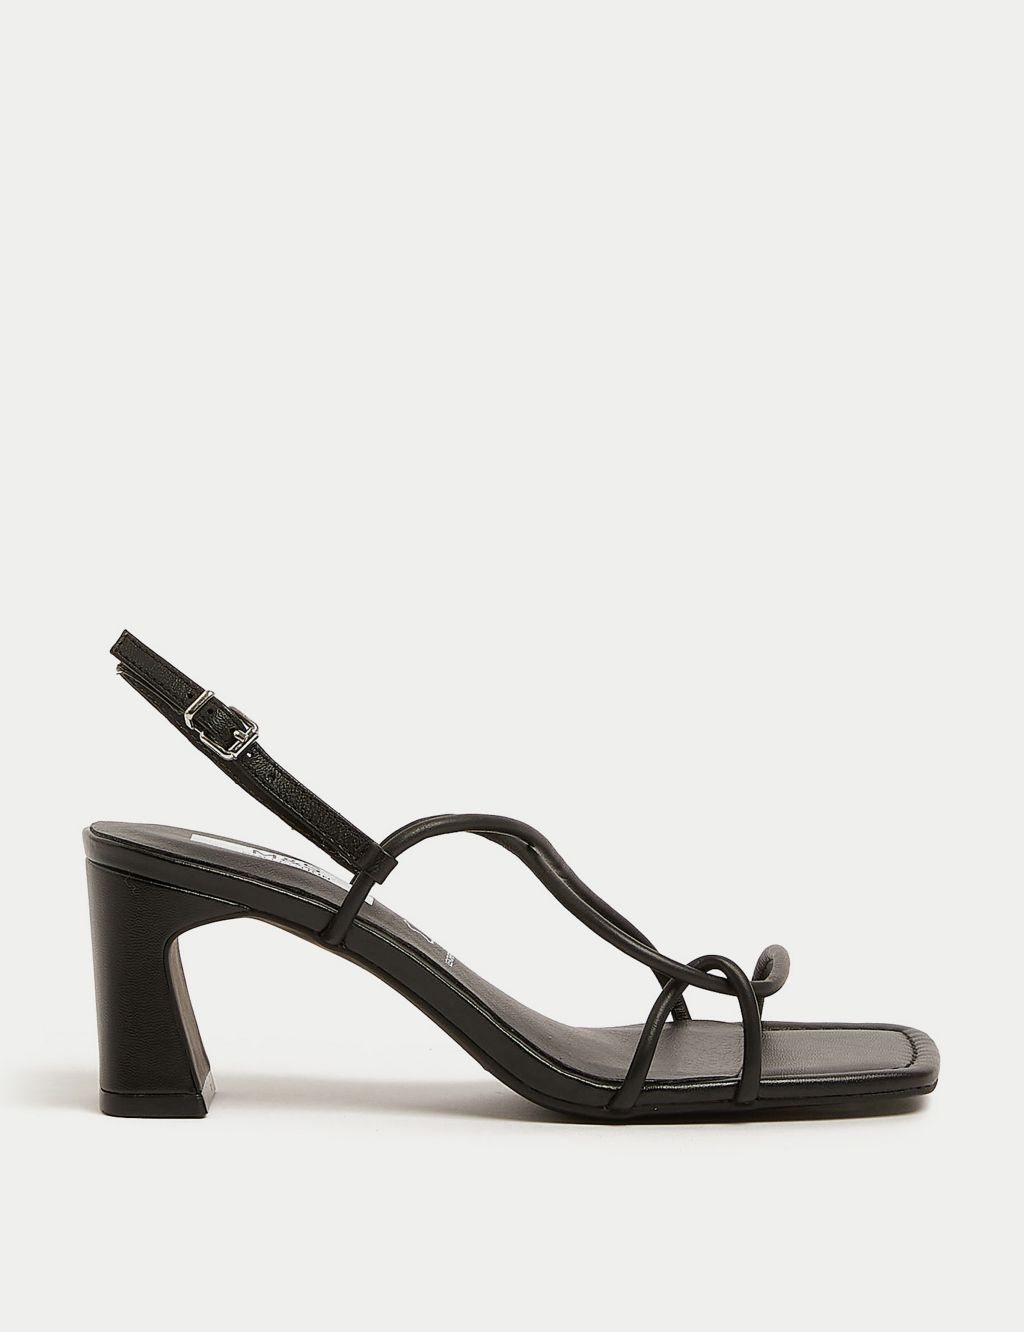 Leather Strappy Statement Sandals Mid image 1